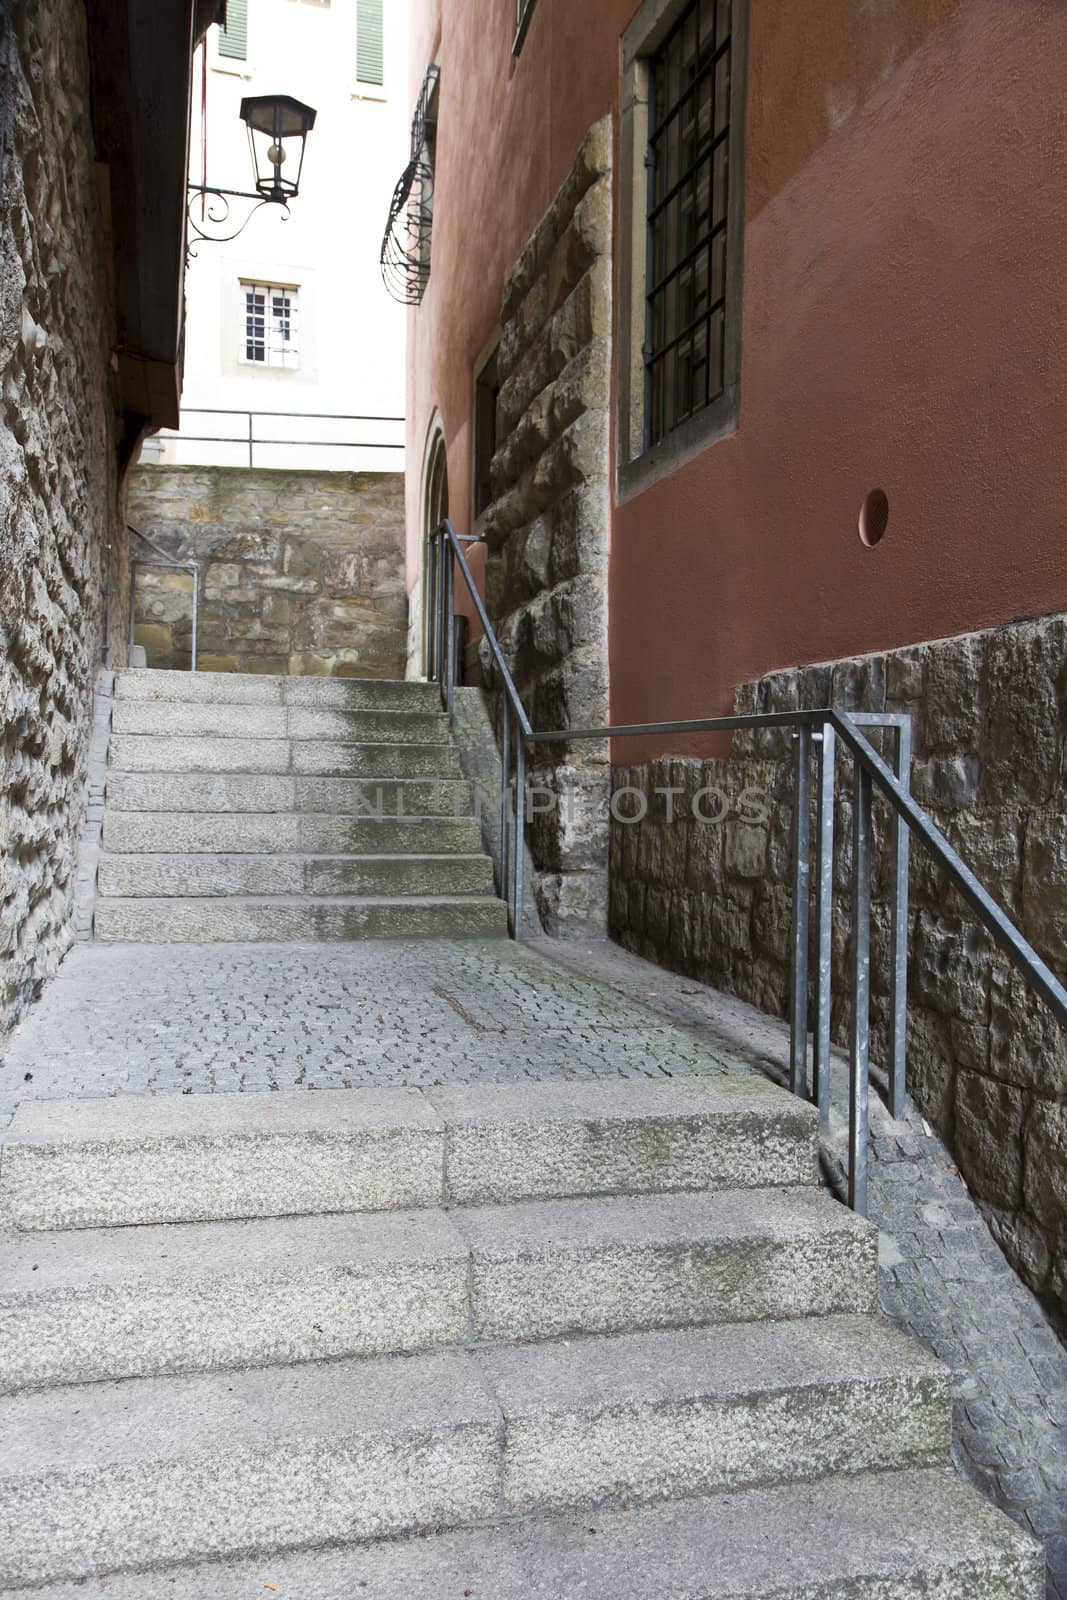 steps in ancient town by gewoldi